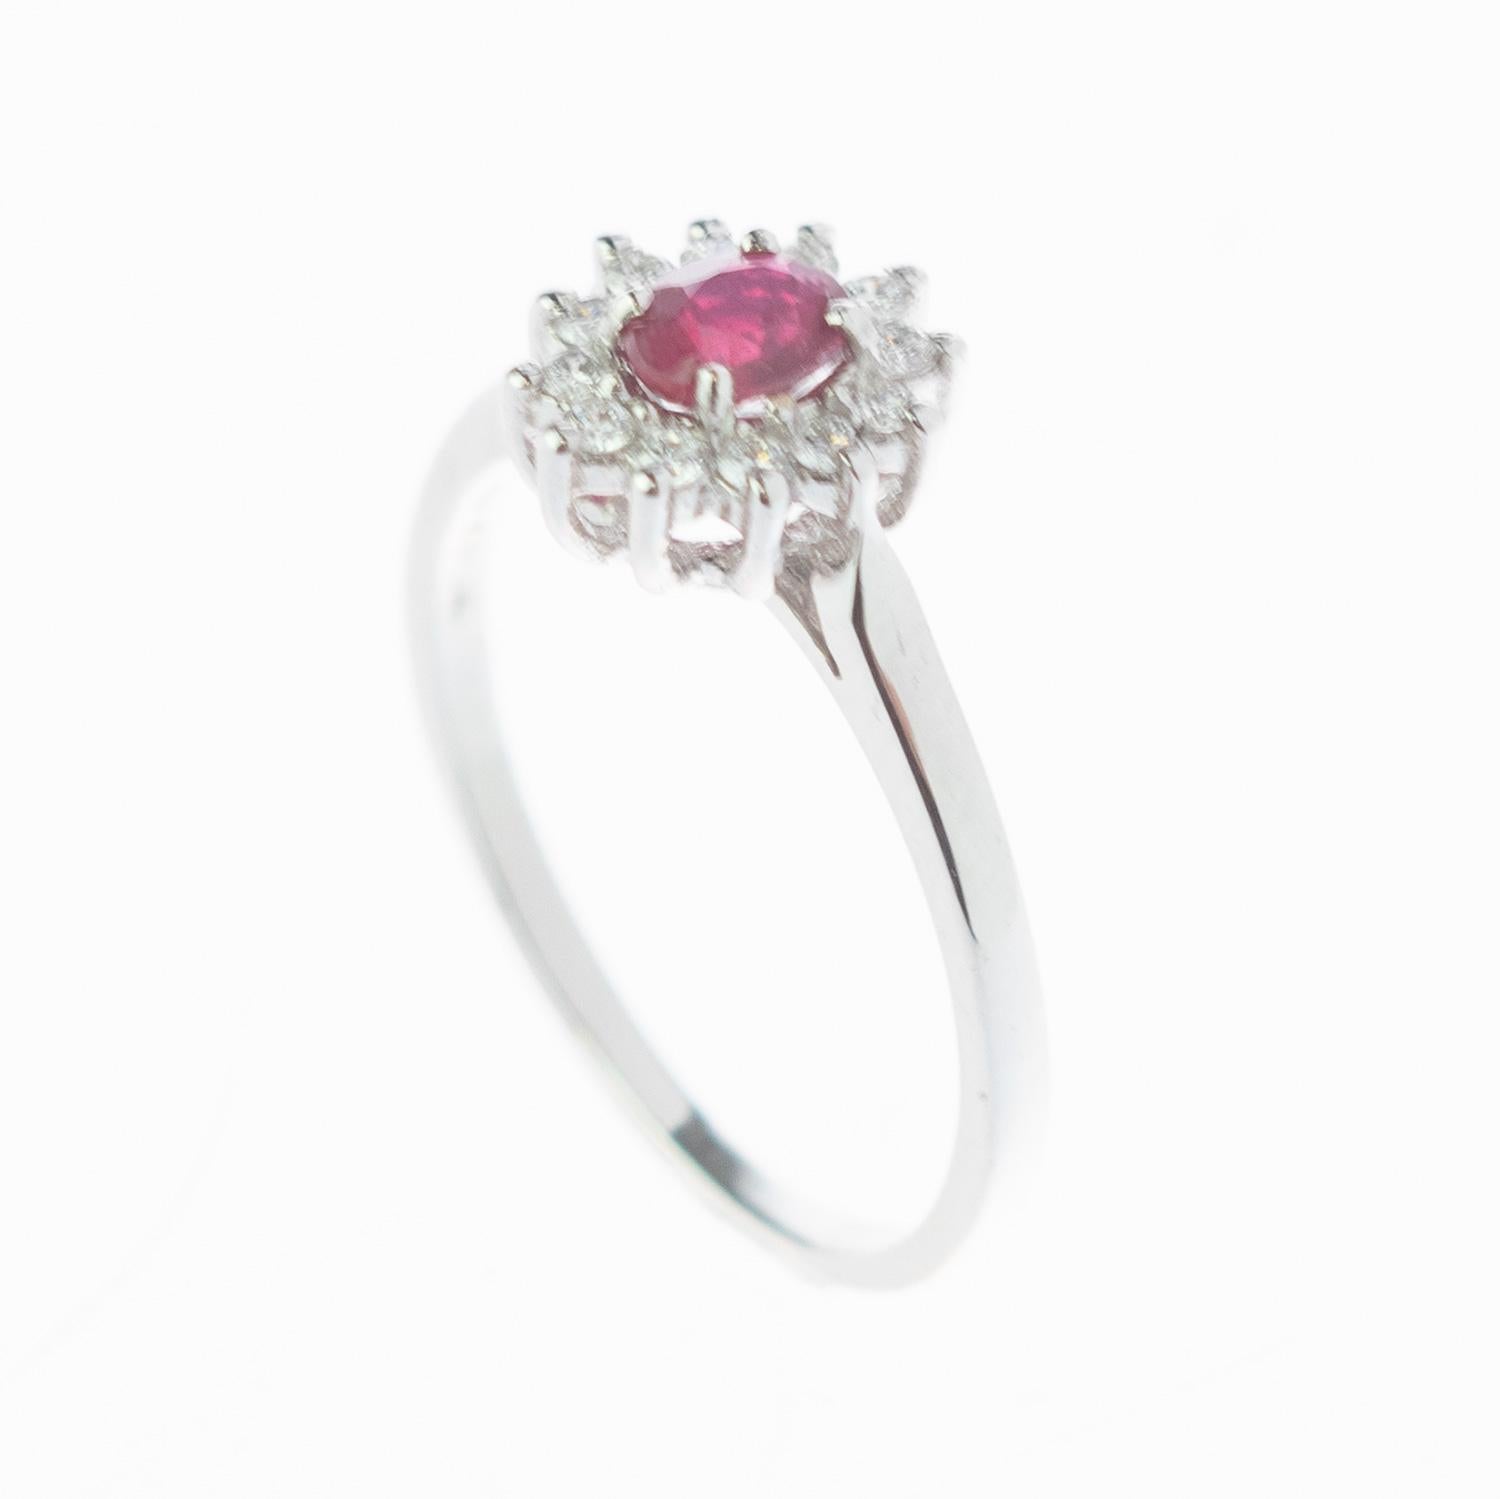 A stunning oval faceted Ruby enhanced by 18 karat white gold with diamonds. These epic jewellery pieces are an outstanding display of quality and Italian handmade royal craftsmanship. Create a fashionable look full of light and desire. This ring